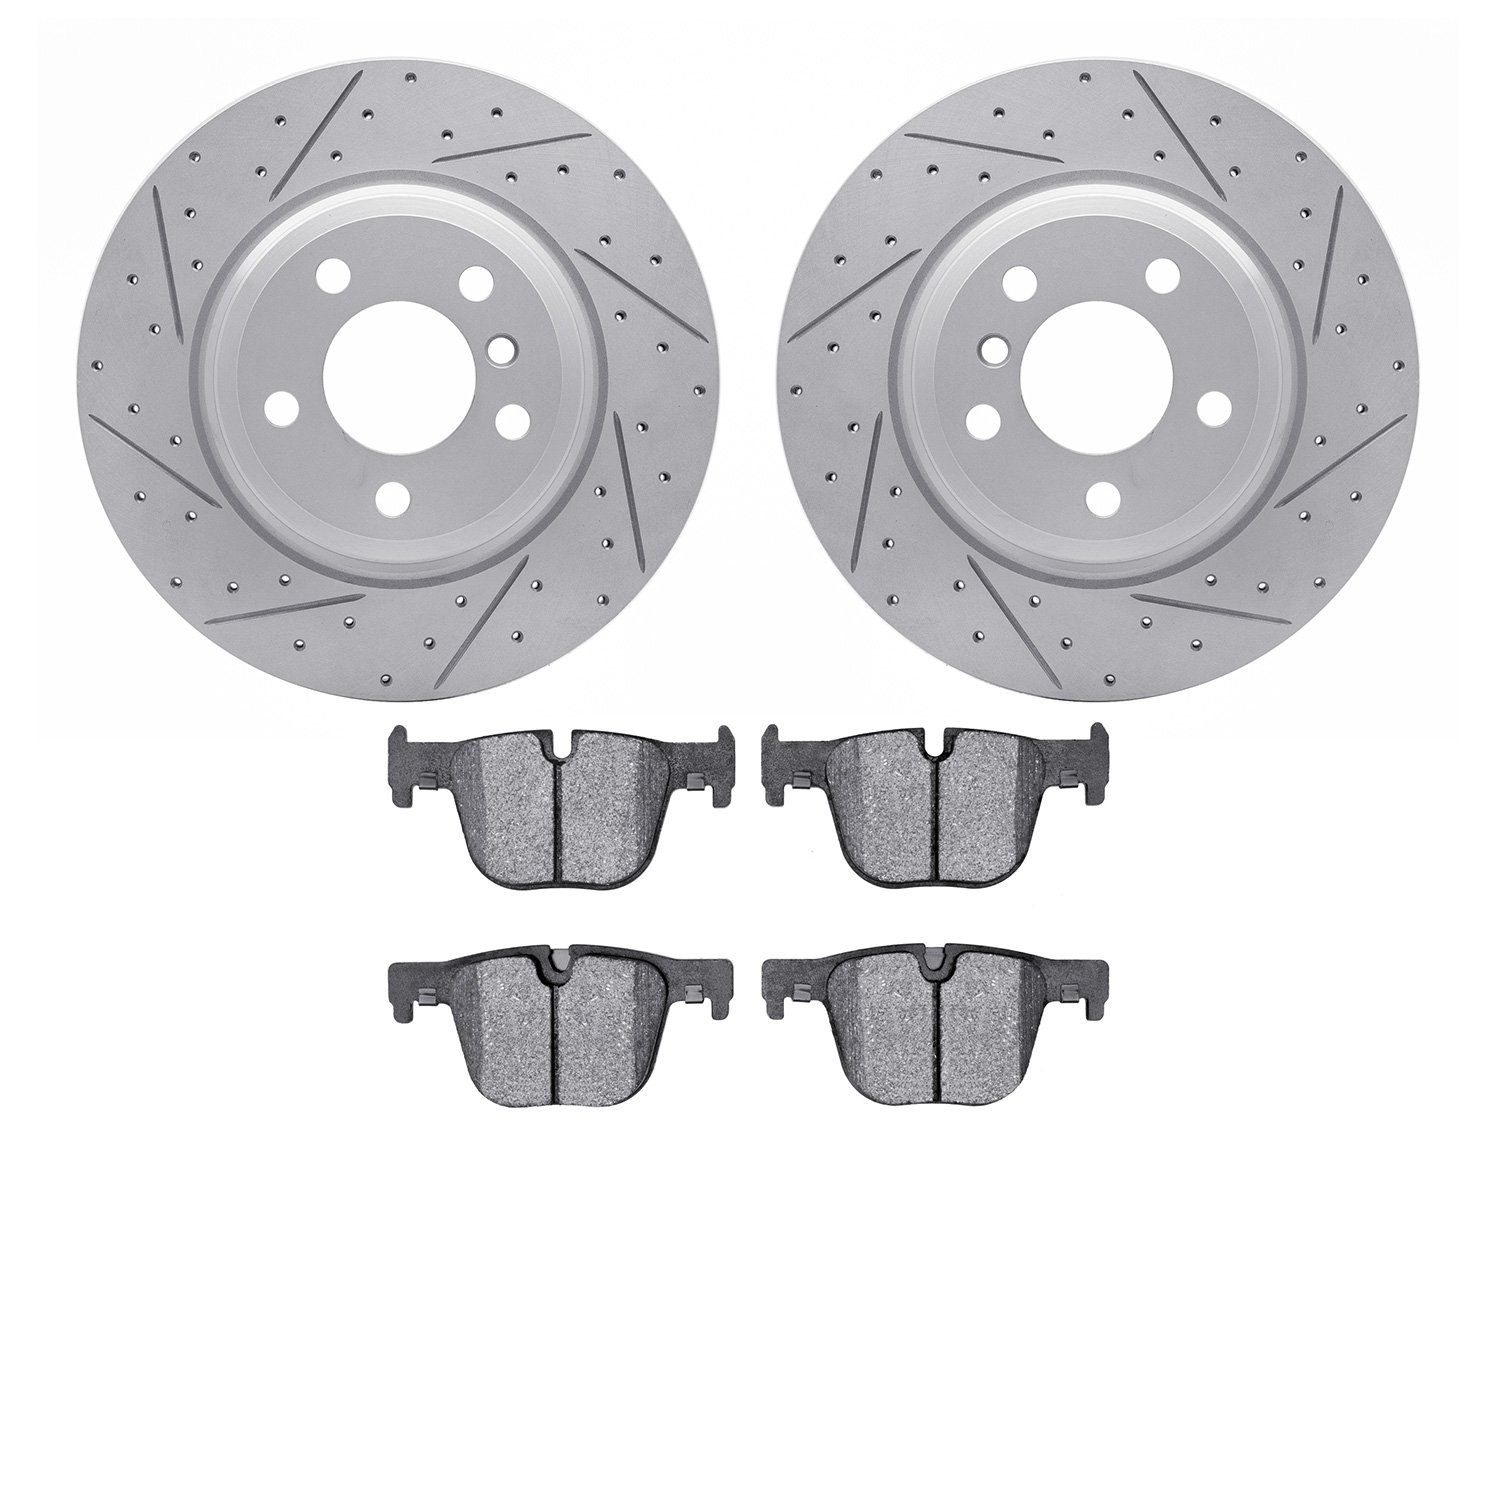 2602-31210 Geoperformance Drilled/Slotted Rotors w/5000 Euro Ceramic Brake Pads Kit, 2012-2020 BMW, Position: Rear